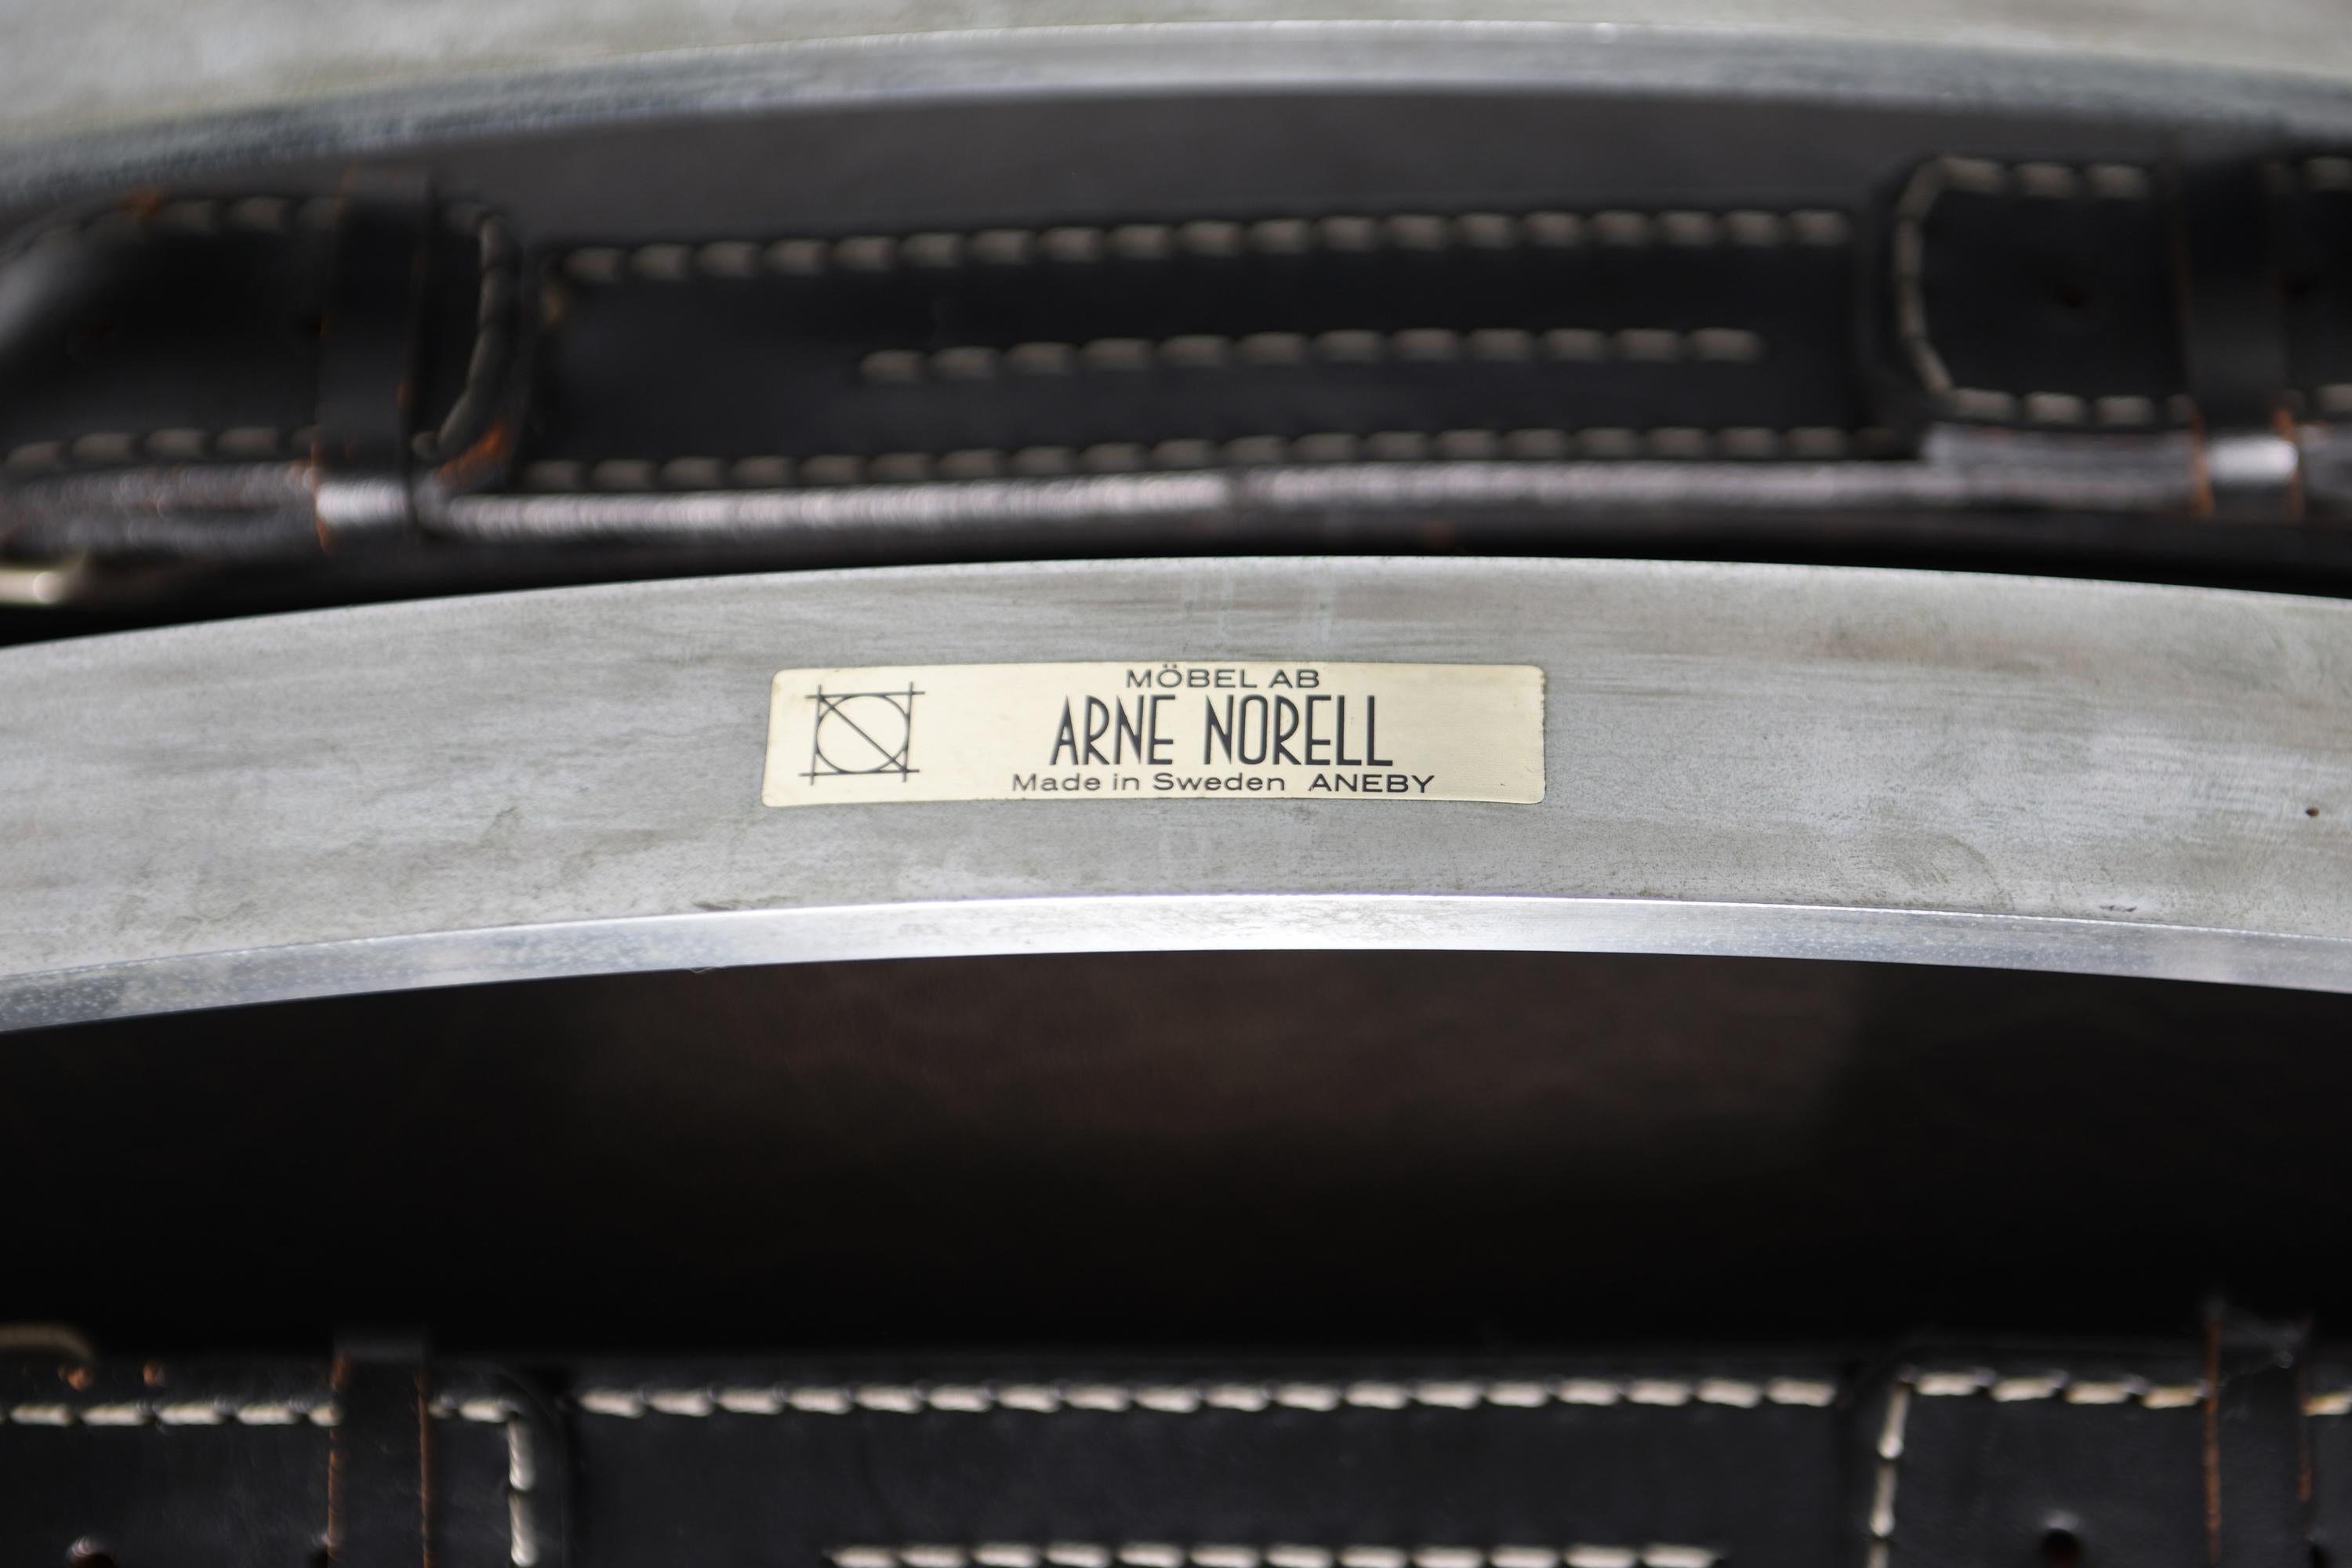 Stunning patinated ARI lounge chair in brown leather by Arne Norell - Möbel AB For Sale 2